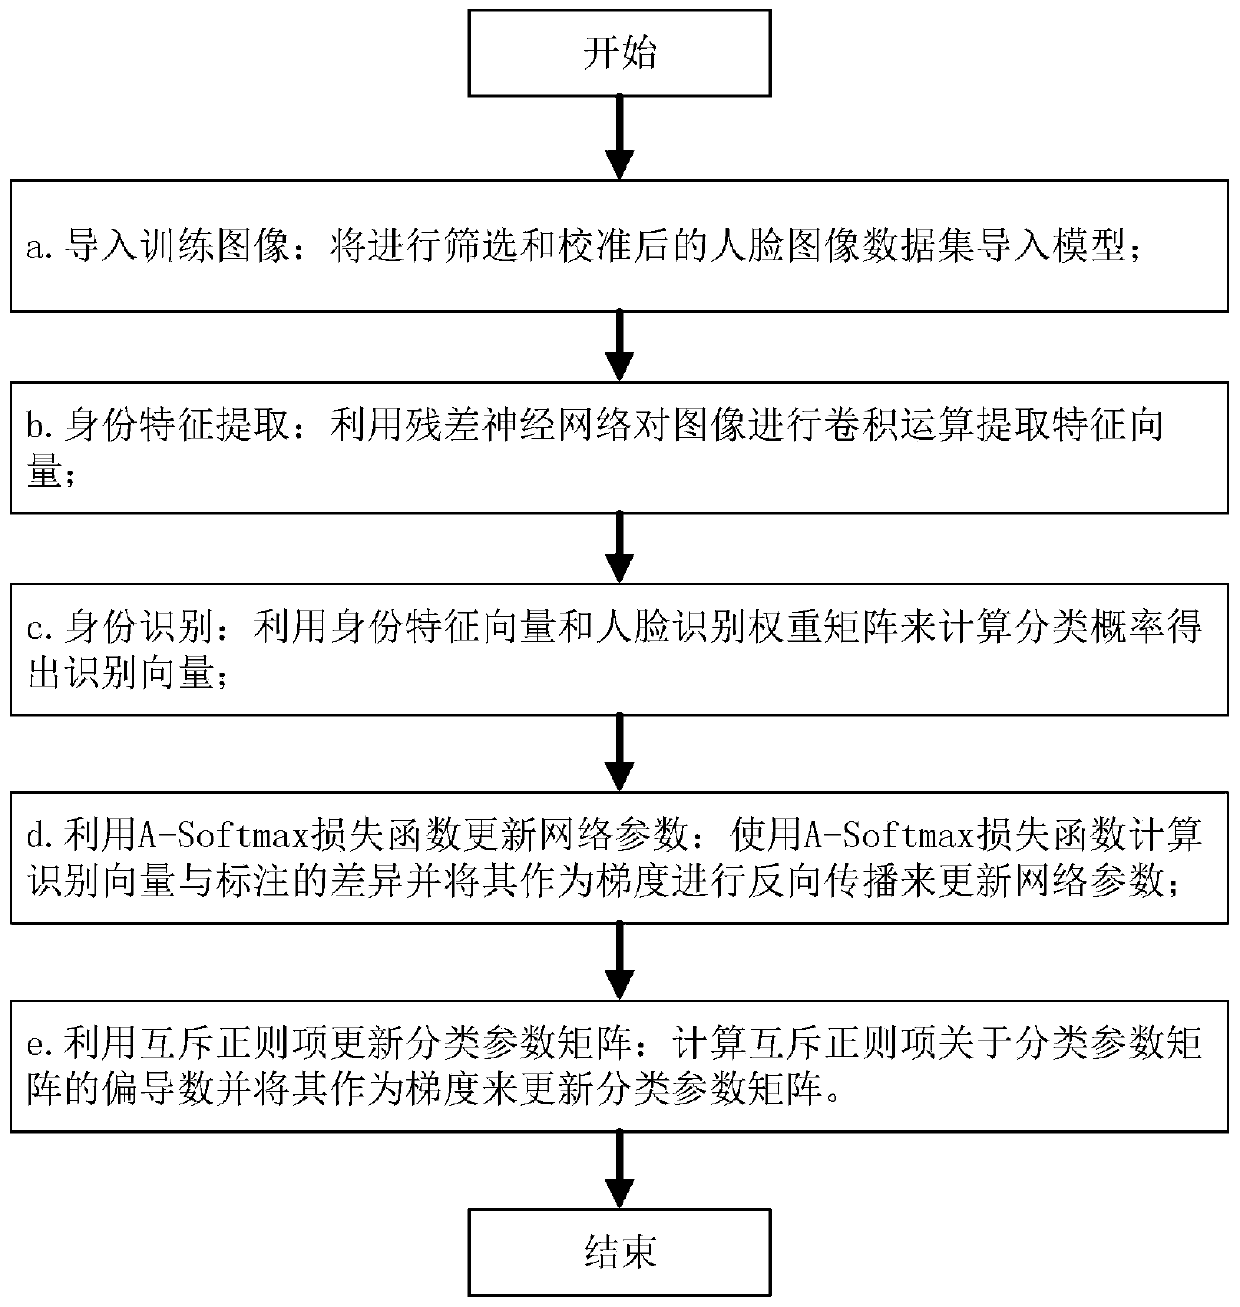 Face recognition method based on a mutual exclusion regularization technology